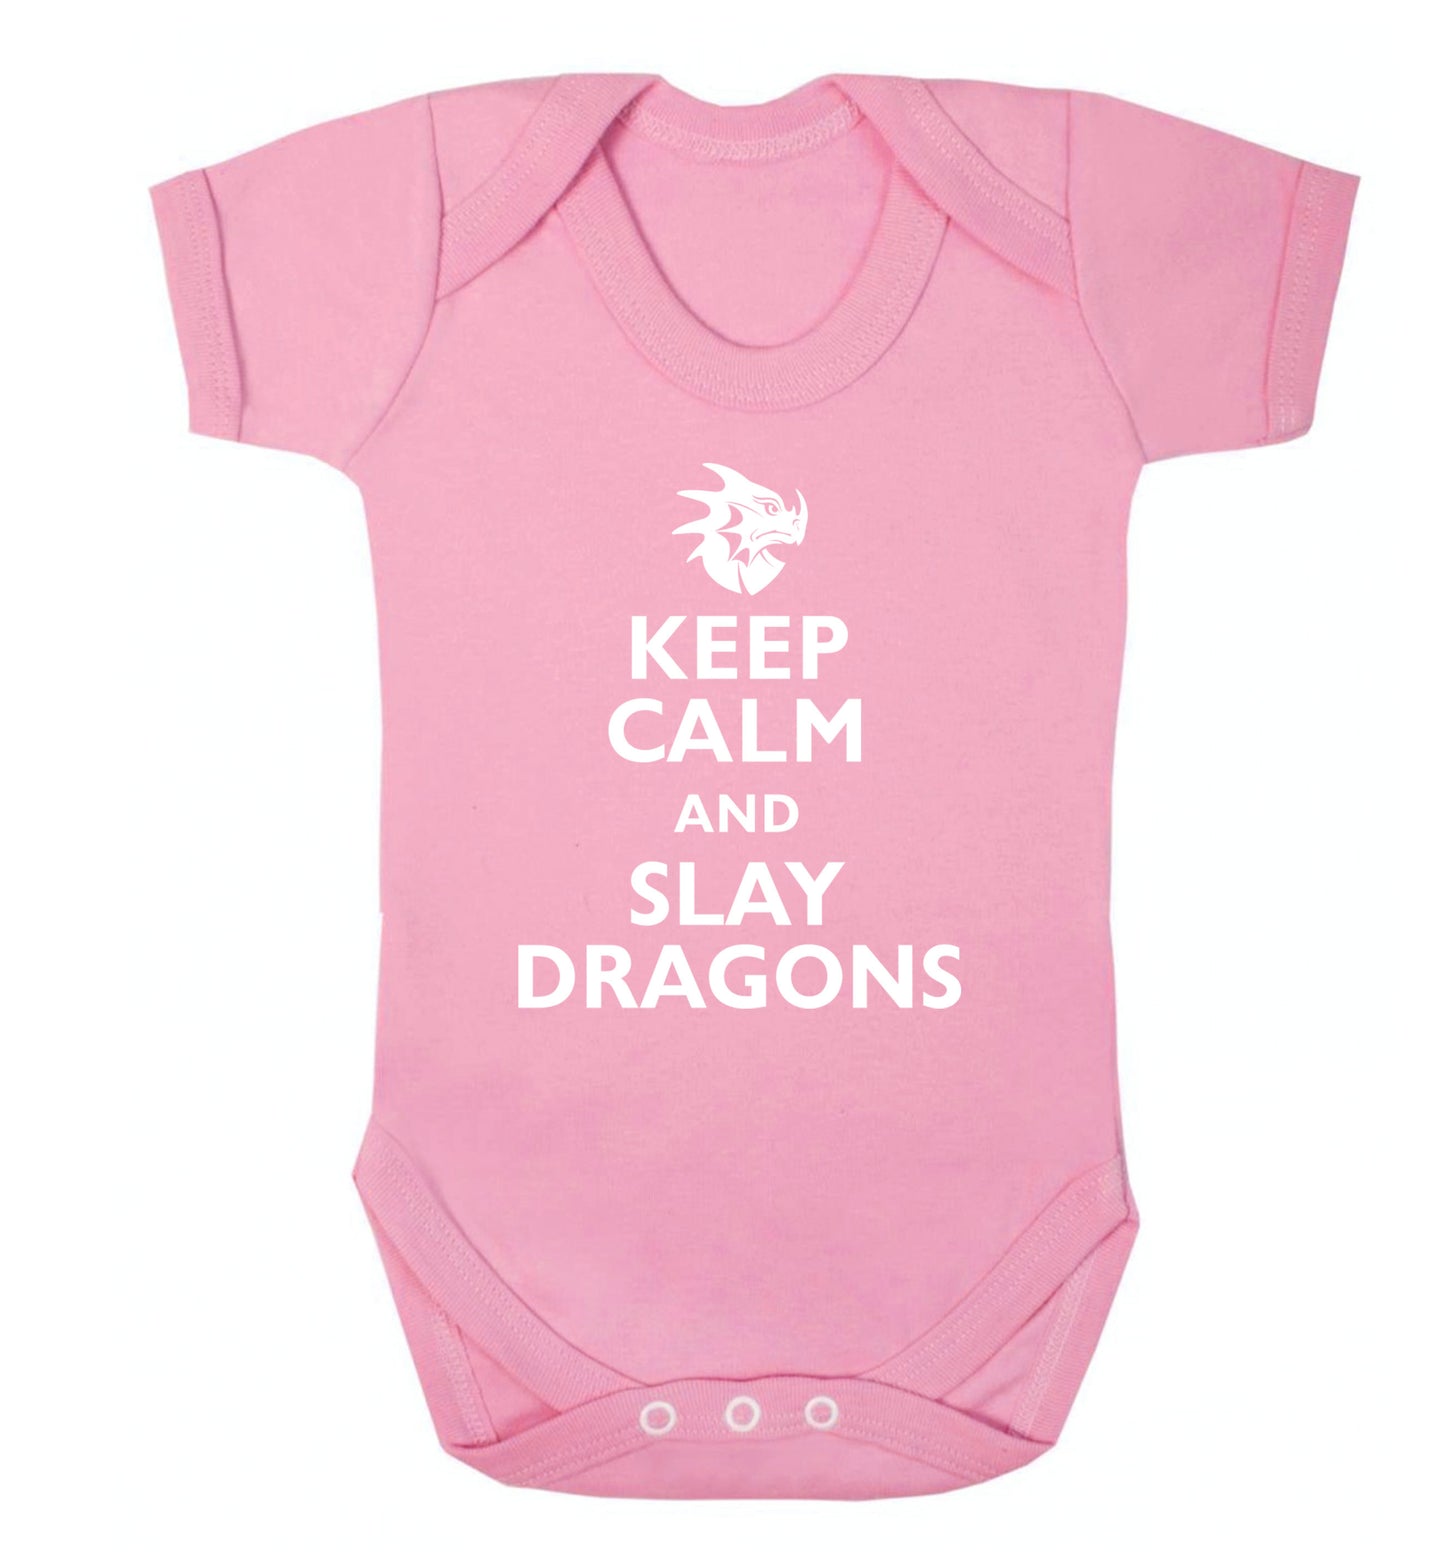 Keep calm and slay dragons Baby Vest pale pink 18-24 months